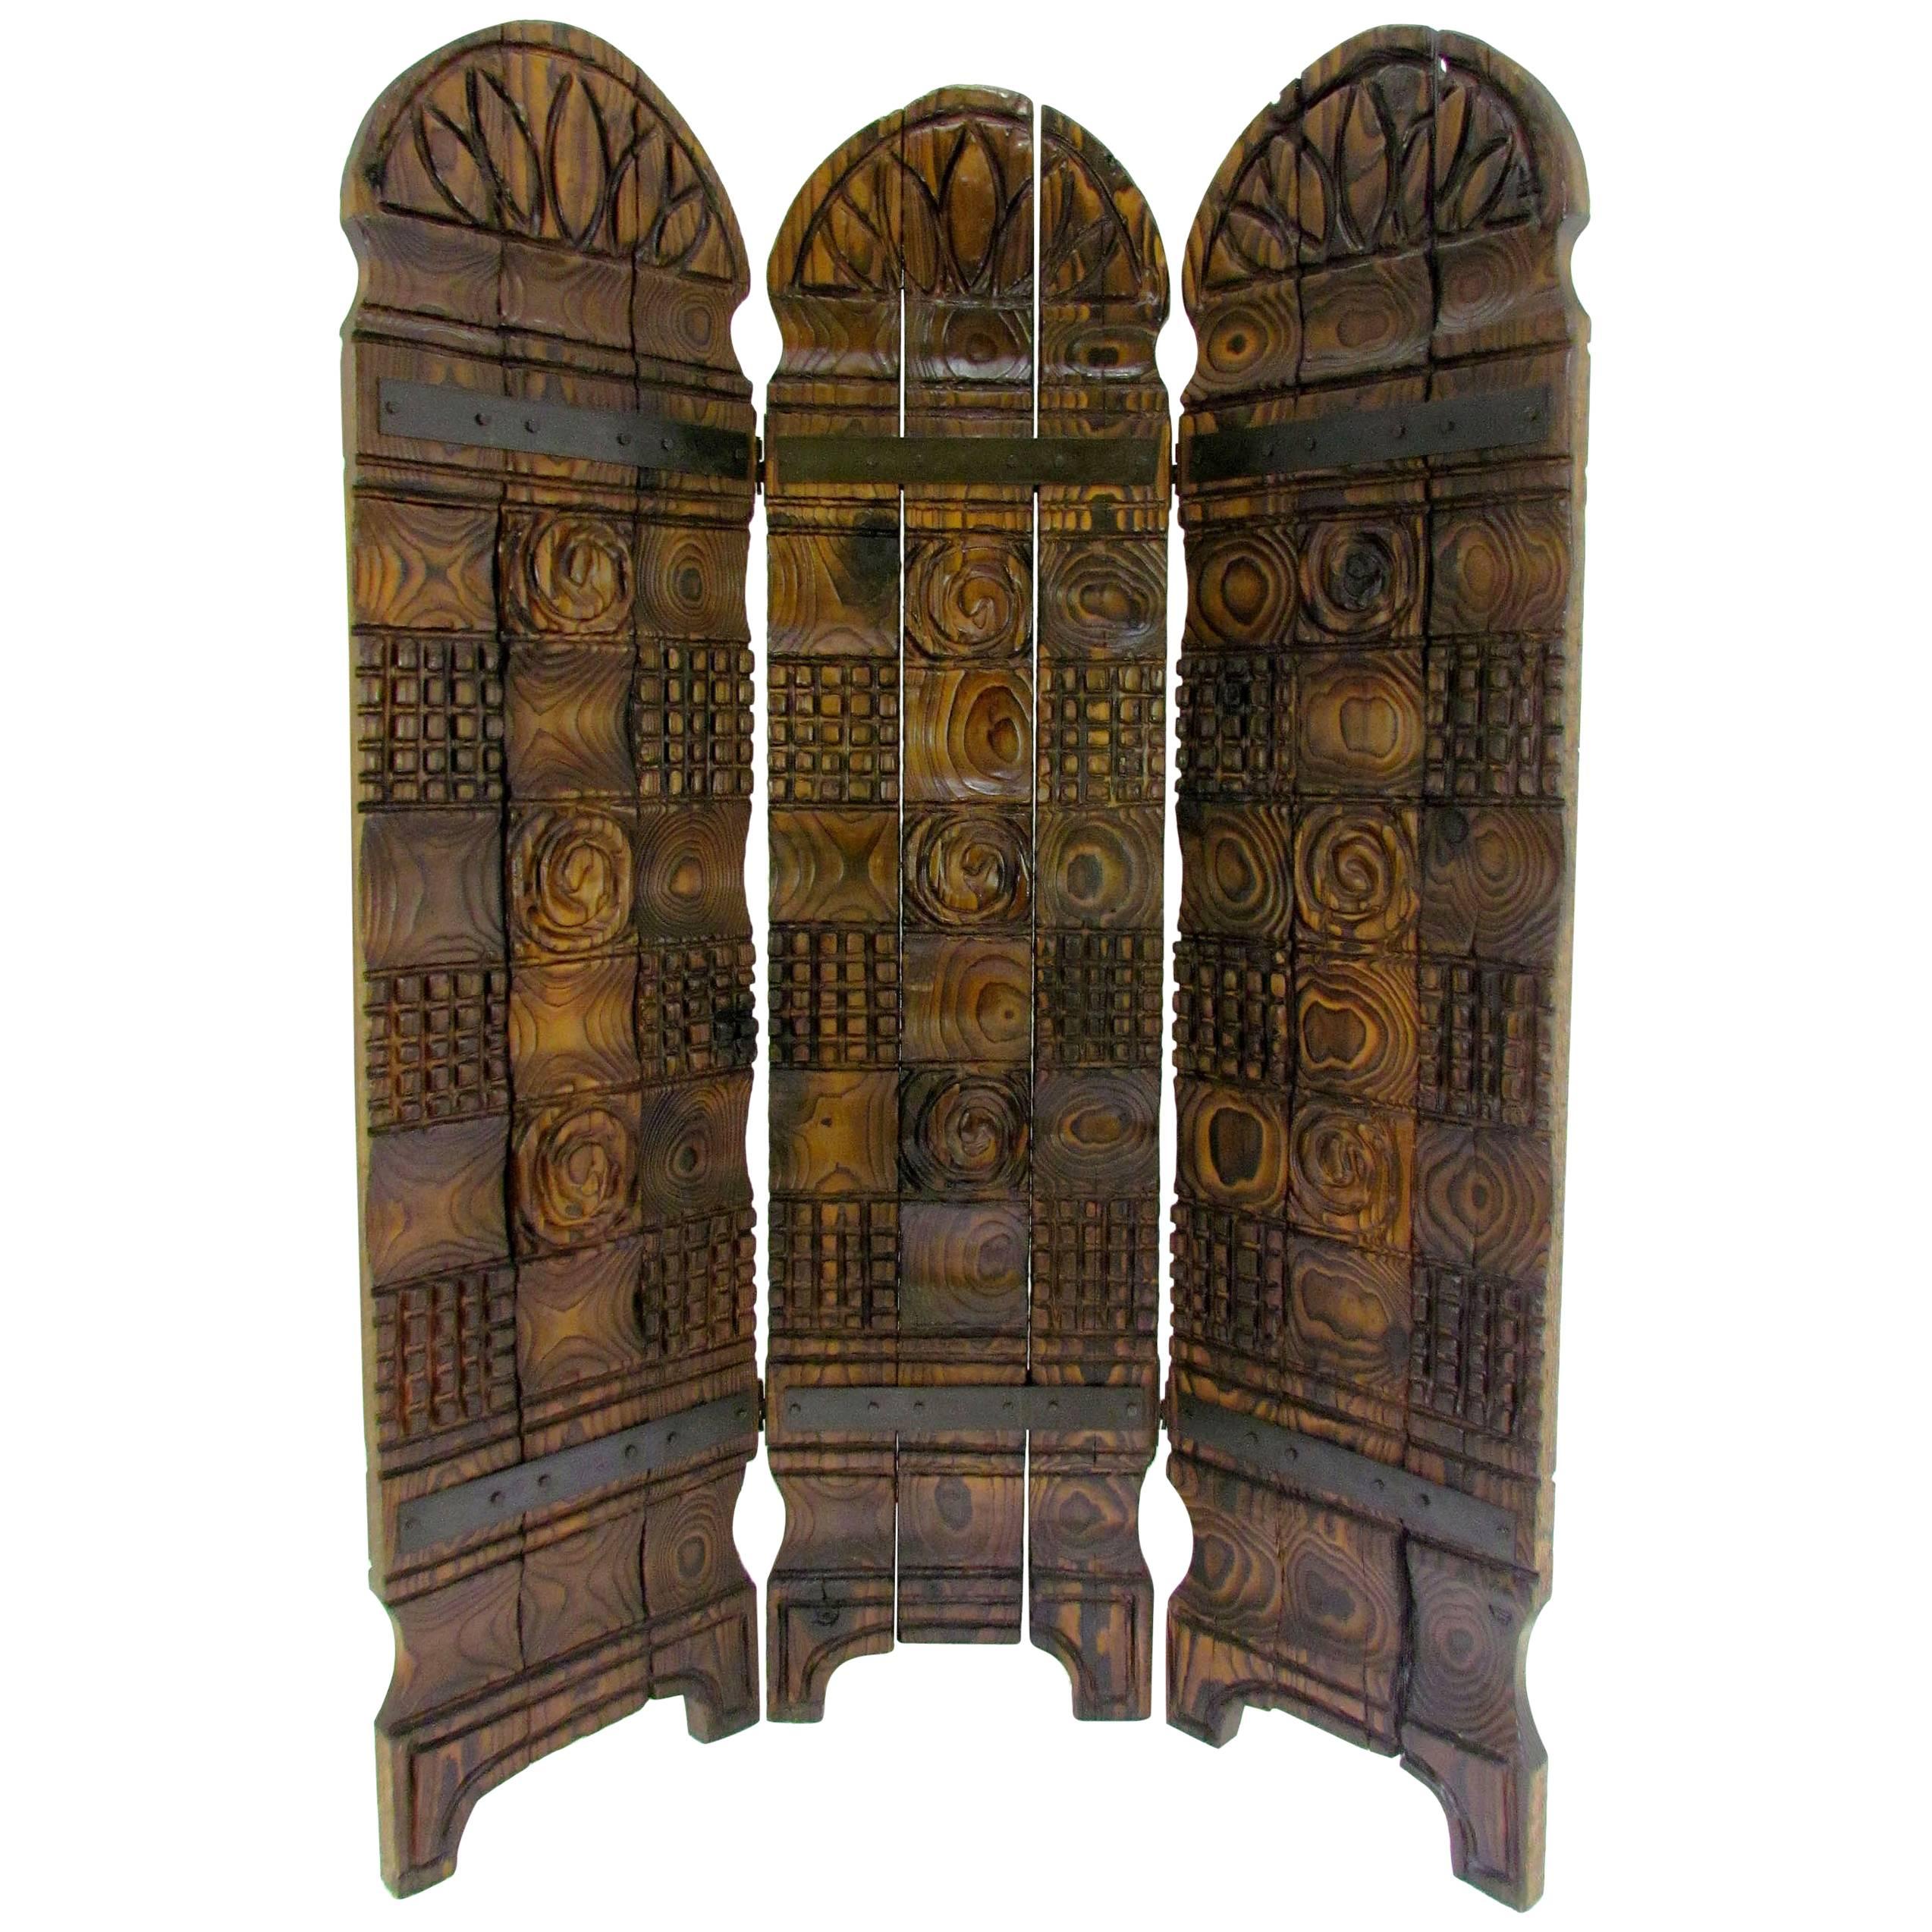 Witco Tiki Carved Wood Three-Panel Screen or Room Divider, circa 1960s